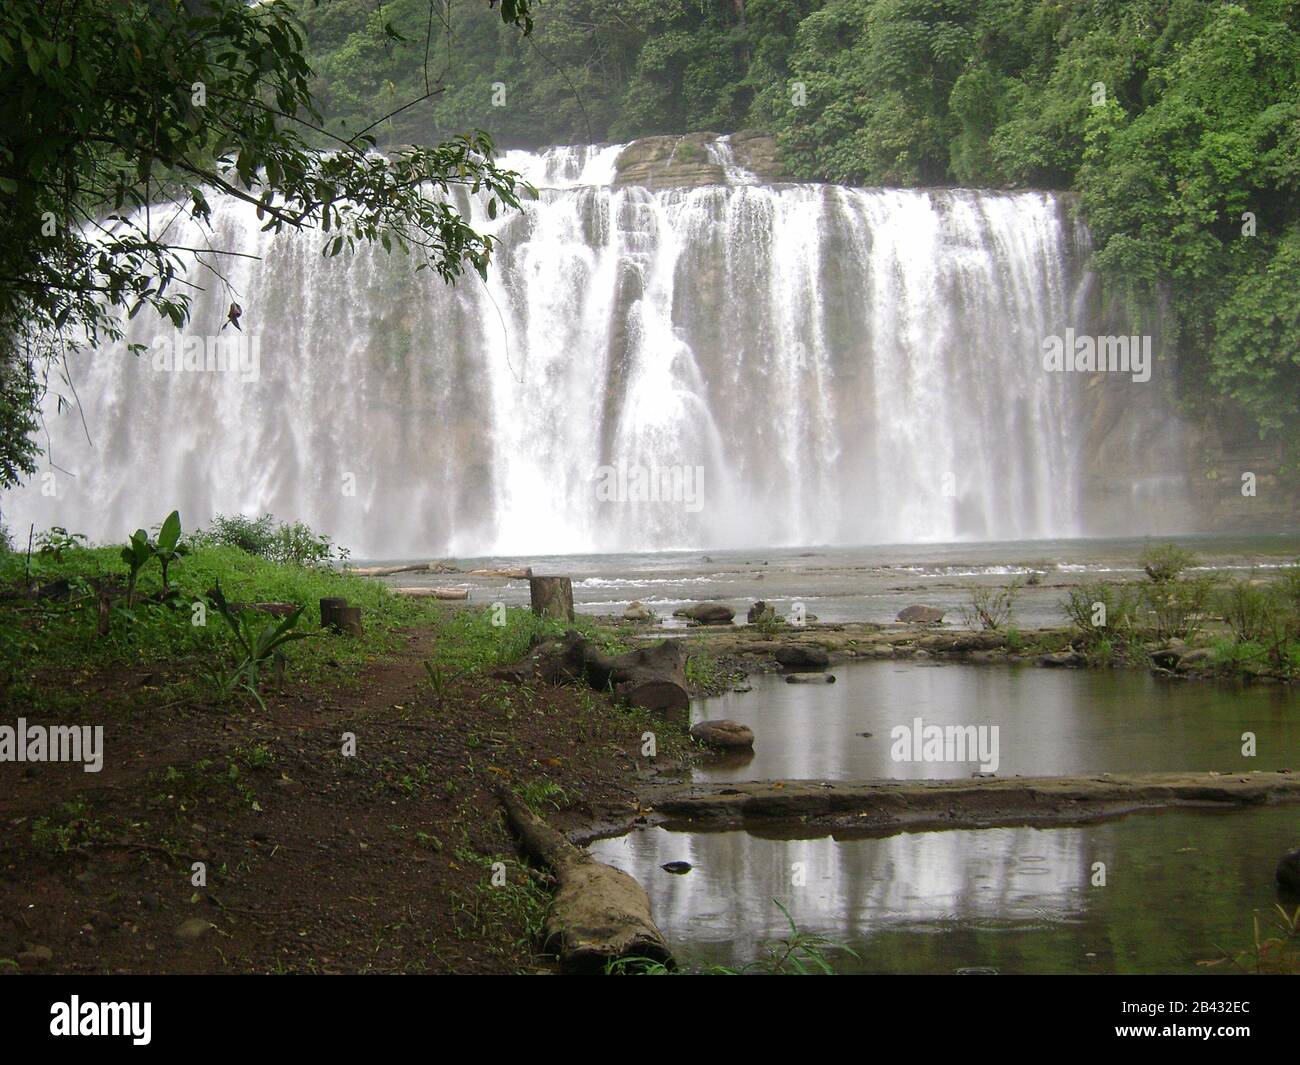 Tinuy-an Falls reflected in a pool of water. Tinuy-an Falls is a top attraction in Surigao del Sur, Philippines. Stock Photo